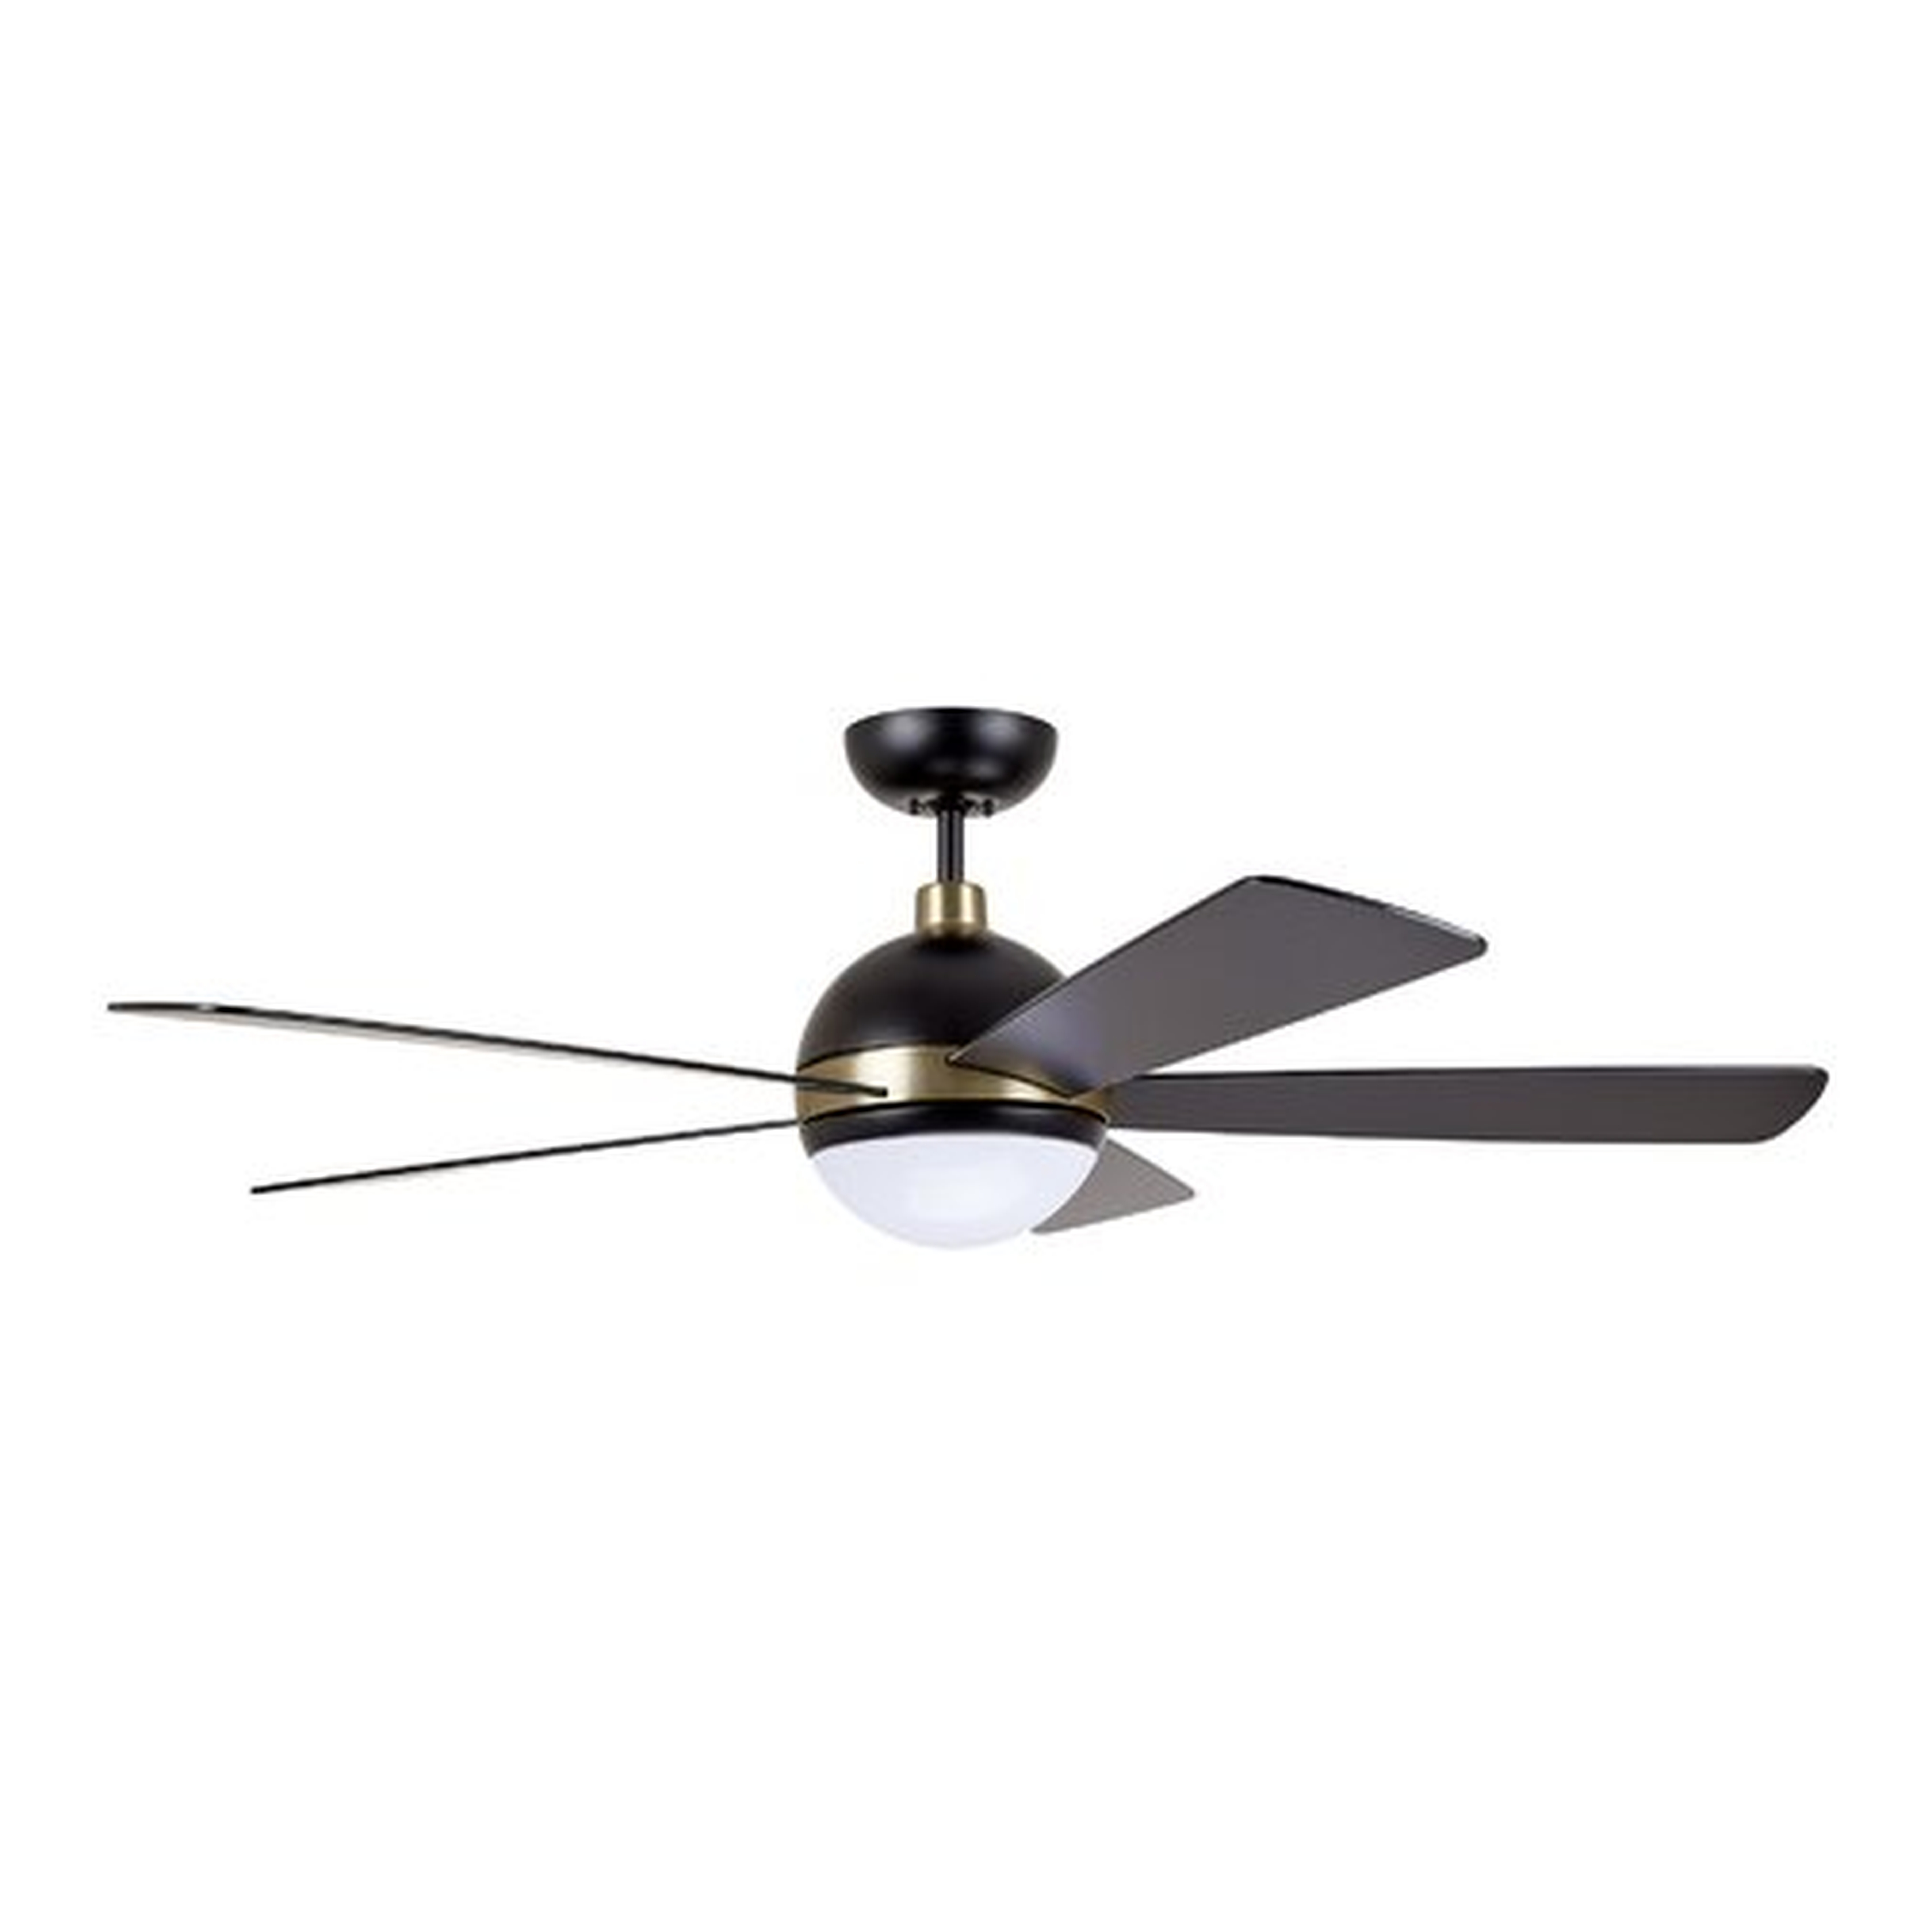 52" Tion Astor 5 Blade LED Ceiling Fan with Remote Light Kit Included - Wayfair